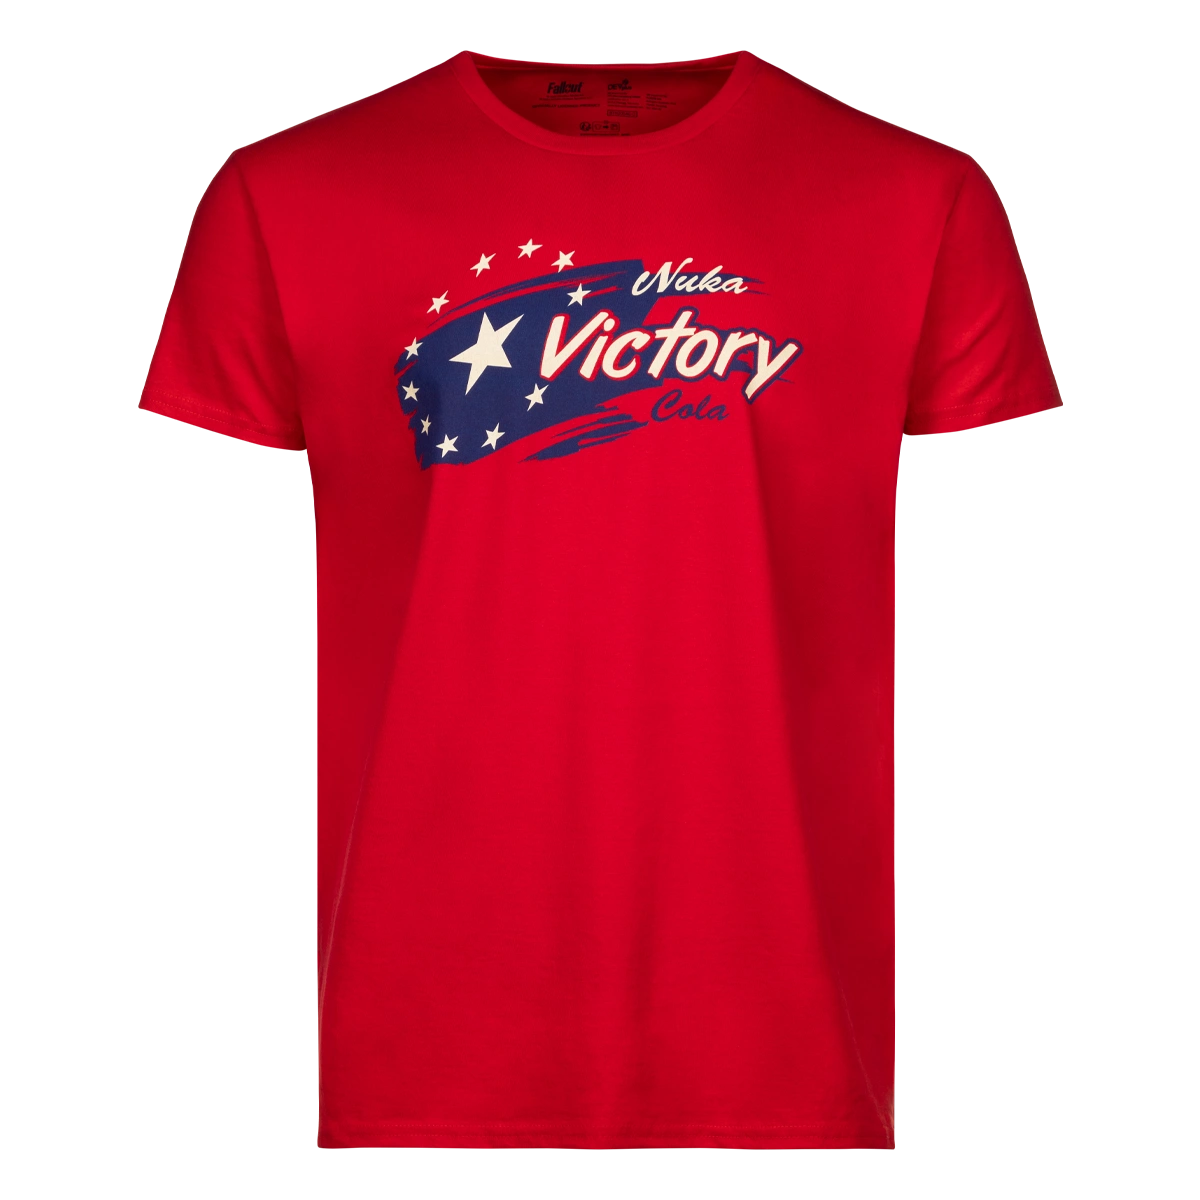 Fallout T-Shirt "Nuka Victory" red